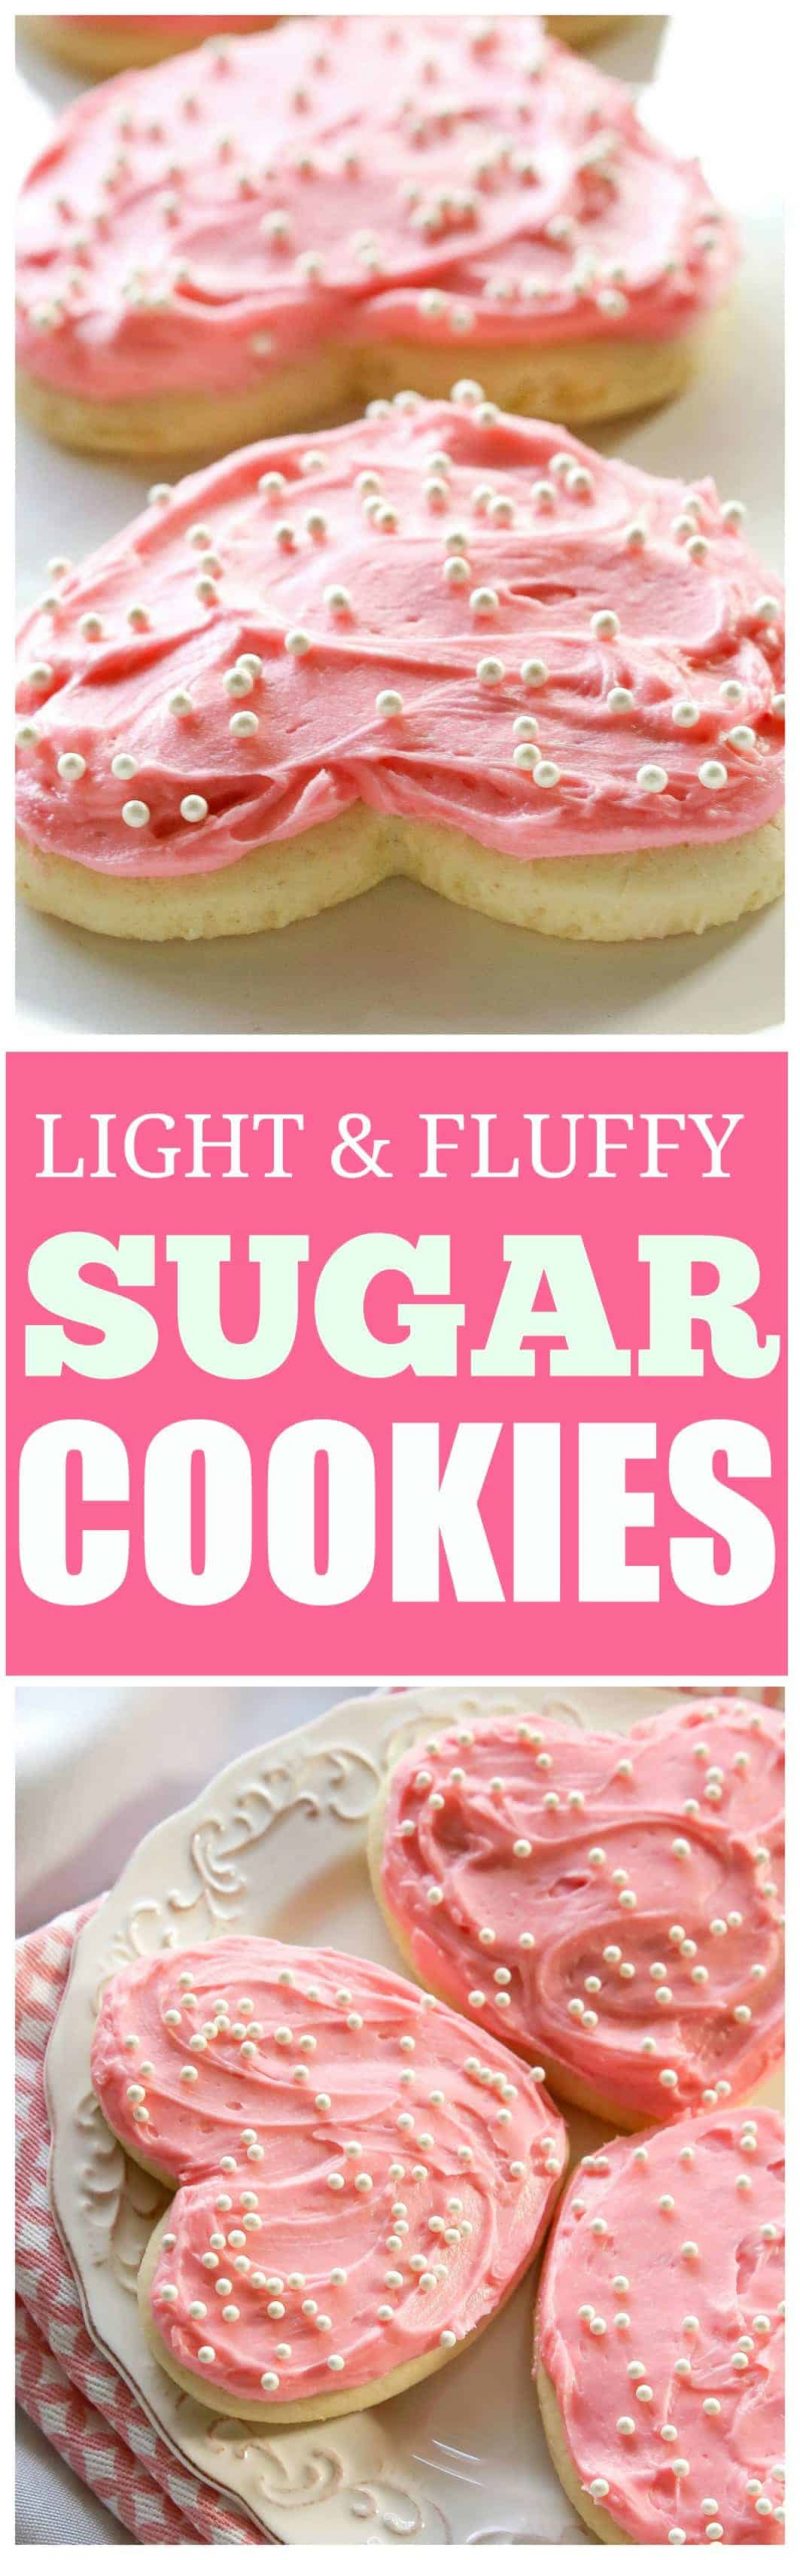 Light and Fluffy Sugar Cookies - these are the perfect sugar cookie! #sugar #cookie #recipe #soft